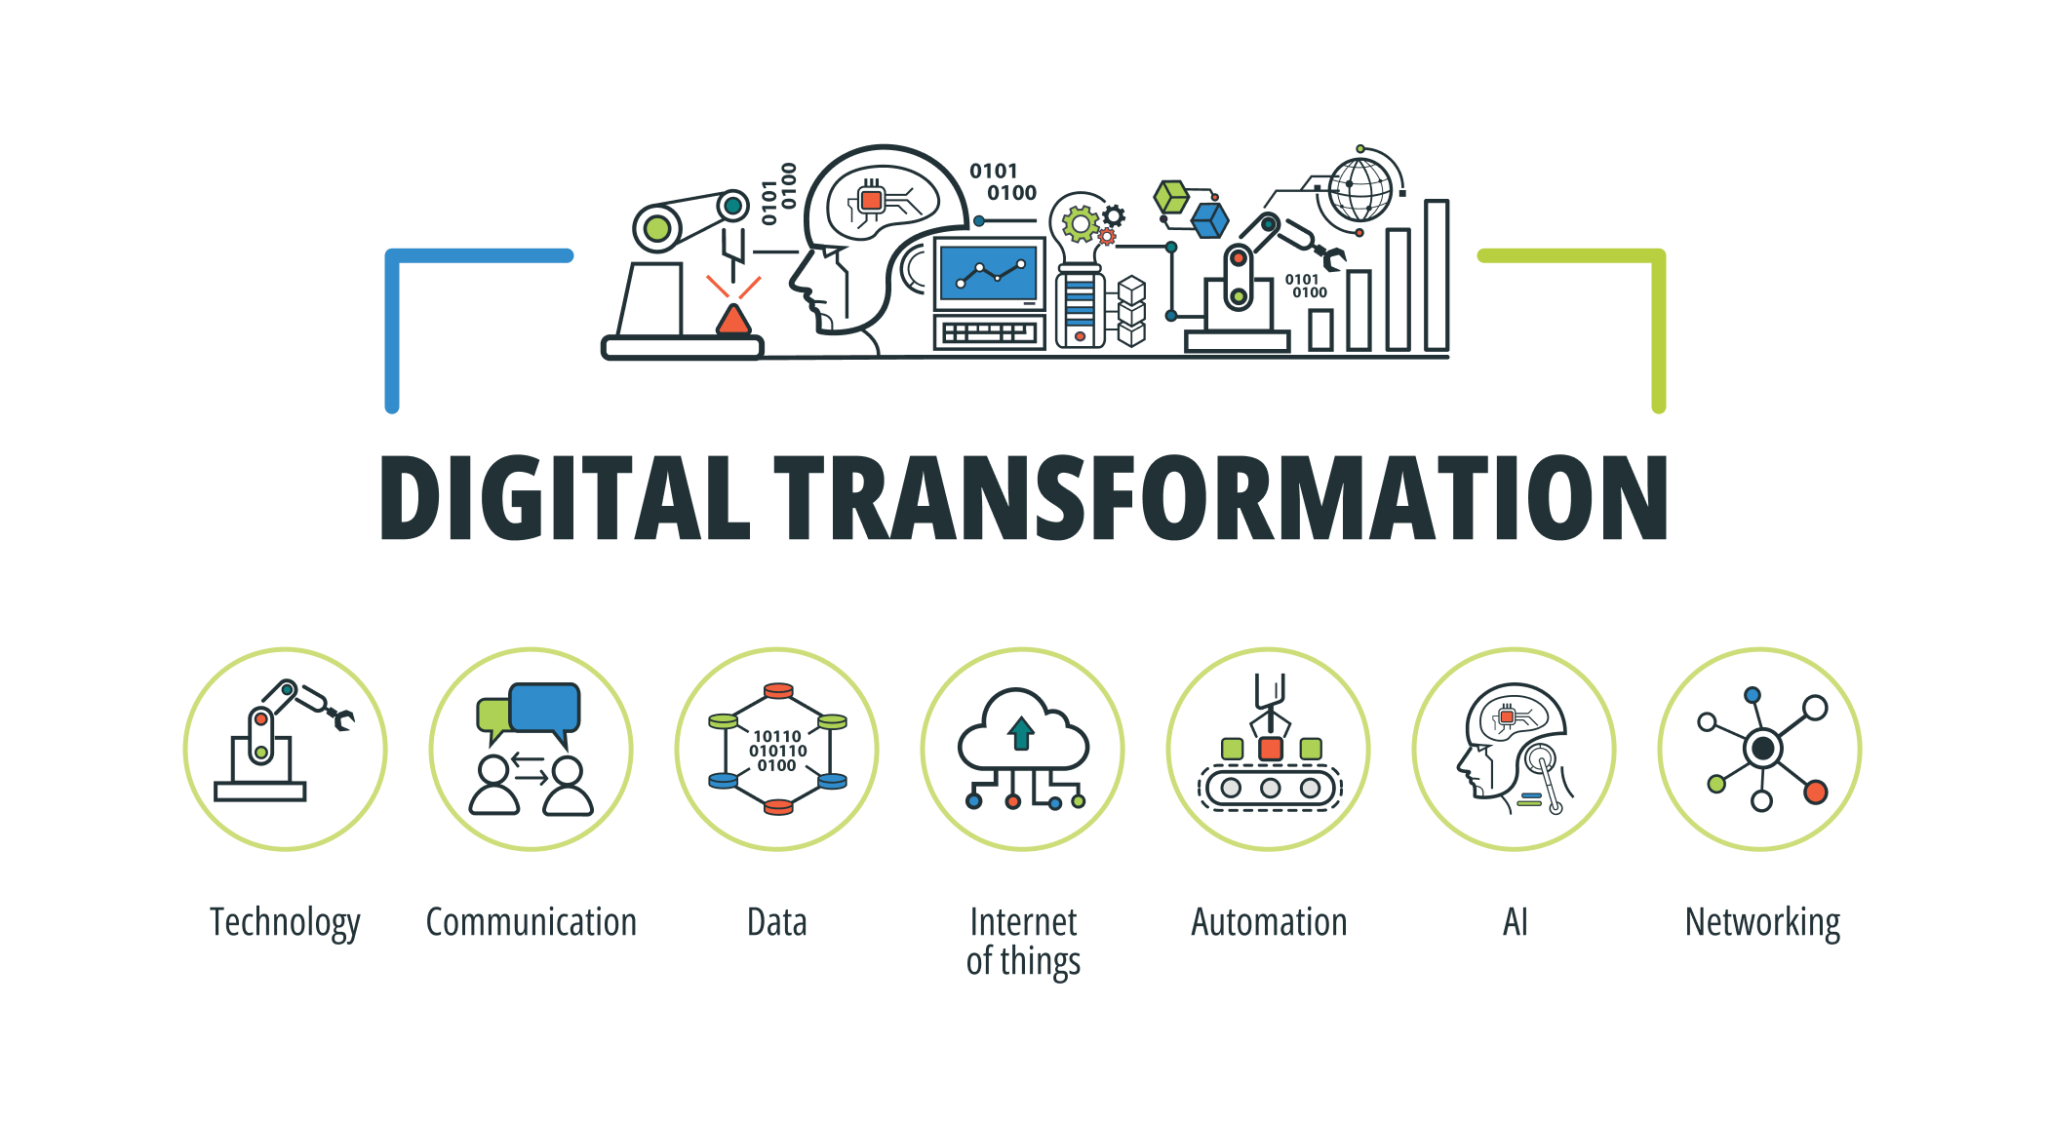 What Are The Four Main Areas Of Digital Transformation? - Elite